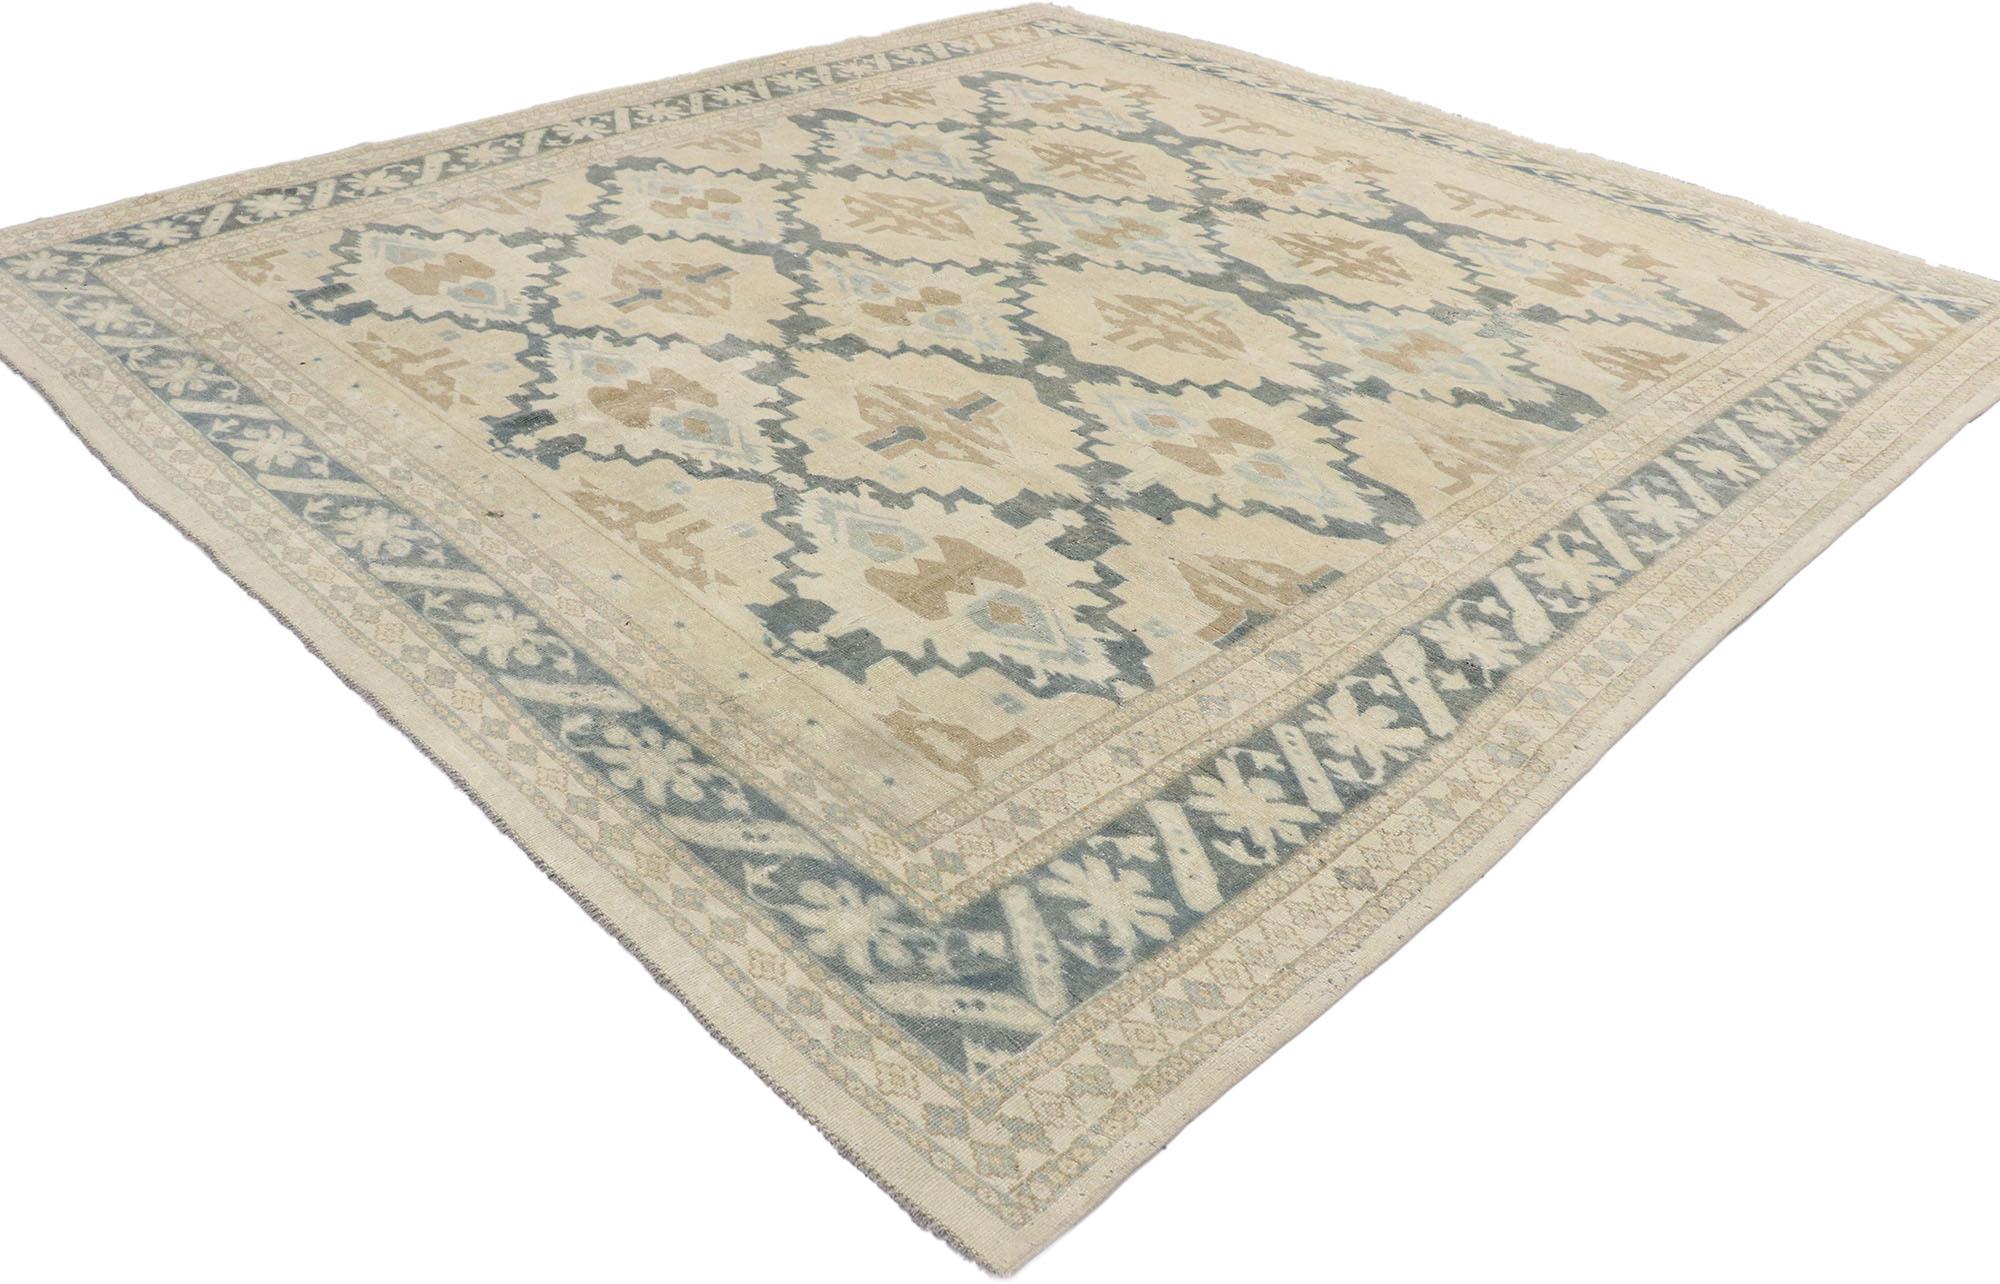 53243 distressed vintage Turkish Oushak rug with Coastal Arts & Crafts style. This hand knotted wool distressed vintage Turkish Oushak rug features an all-over pattern of offset rows of large geometricized open blossoms spread across an abrashed